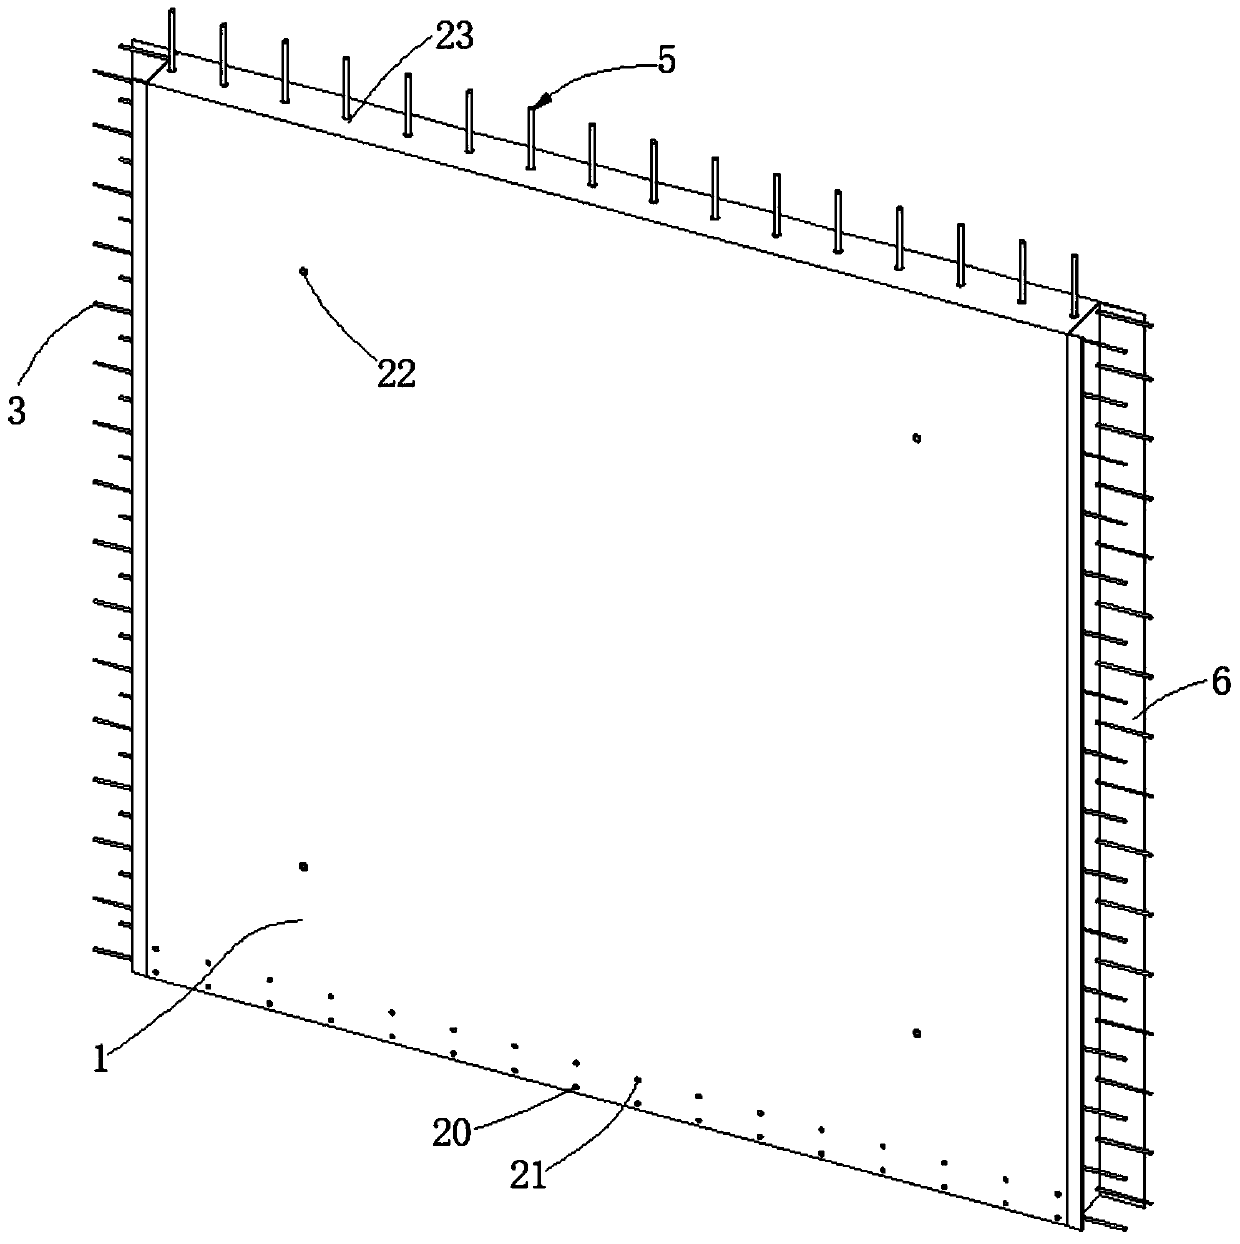 Assembled standard layer module and standard layer construction method combining dry and wet processes